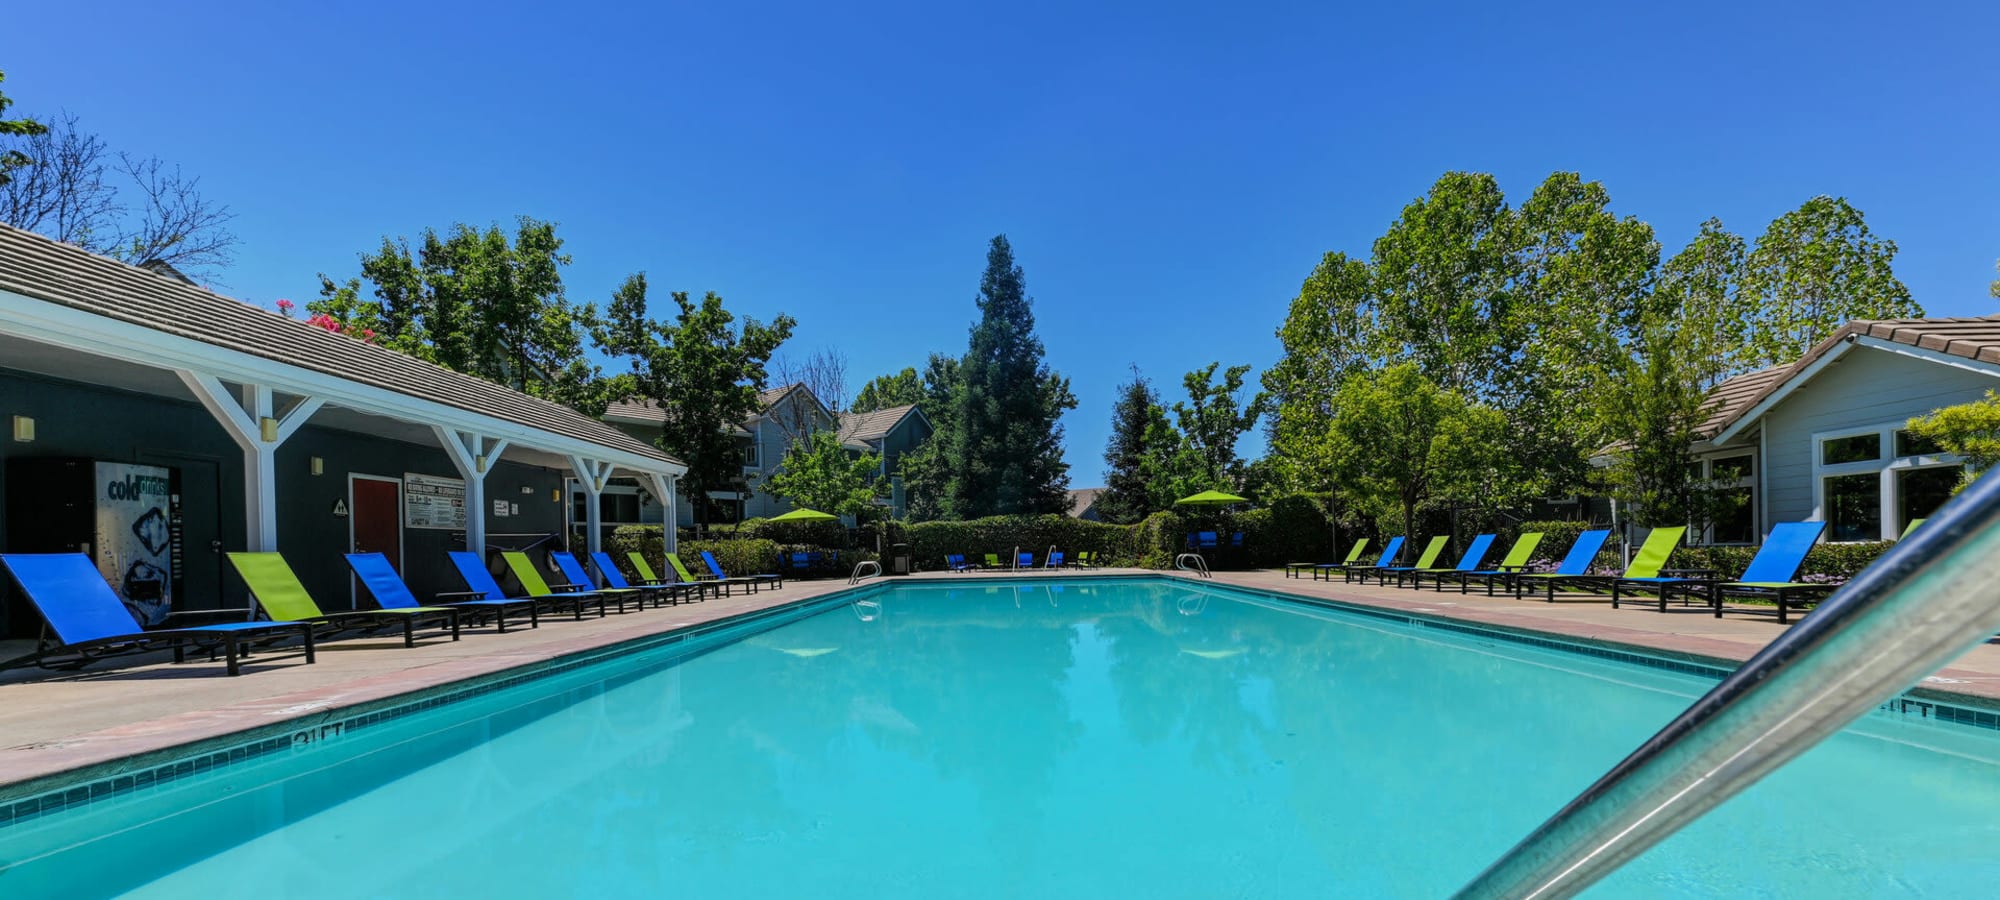 Outdoor swimming pool at Demmon Partners Corporate in Sacramento, California